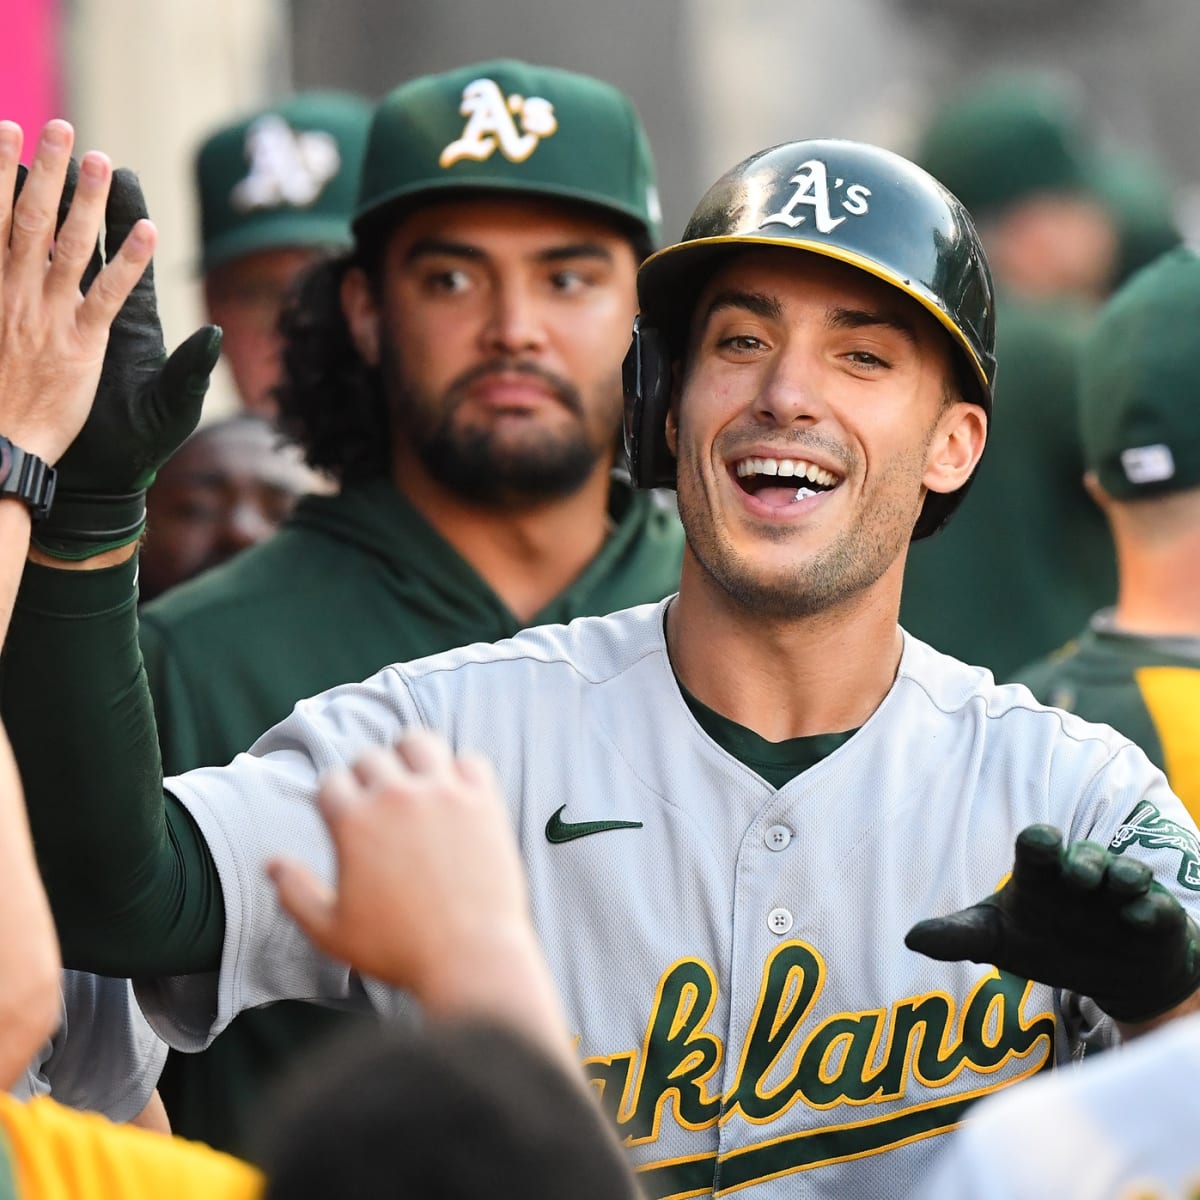 Asking price for Oakland Athletics first baseman Matt Olson is sky high -  Sports Illustrated NY Yankees News, Analysis and More